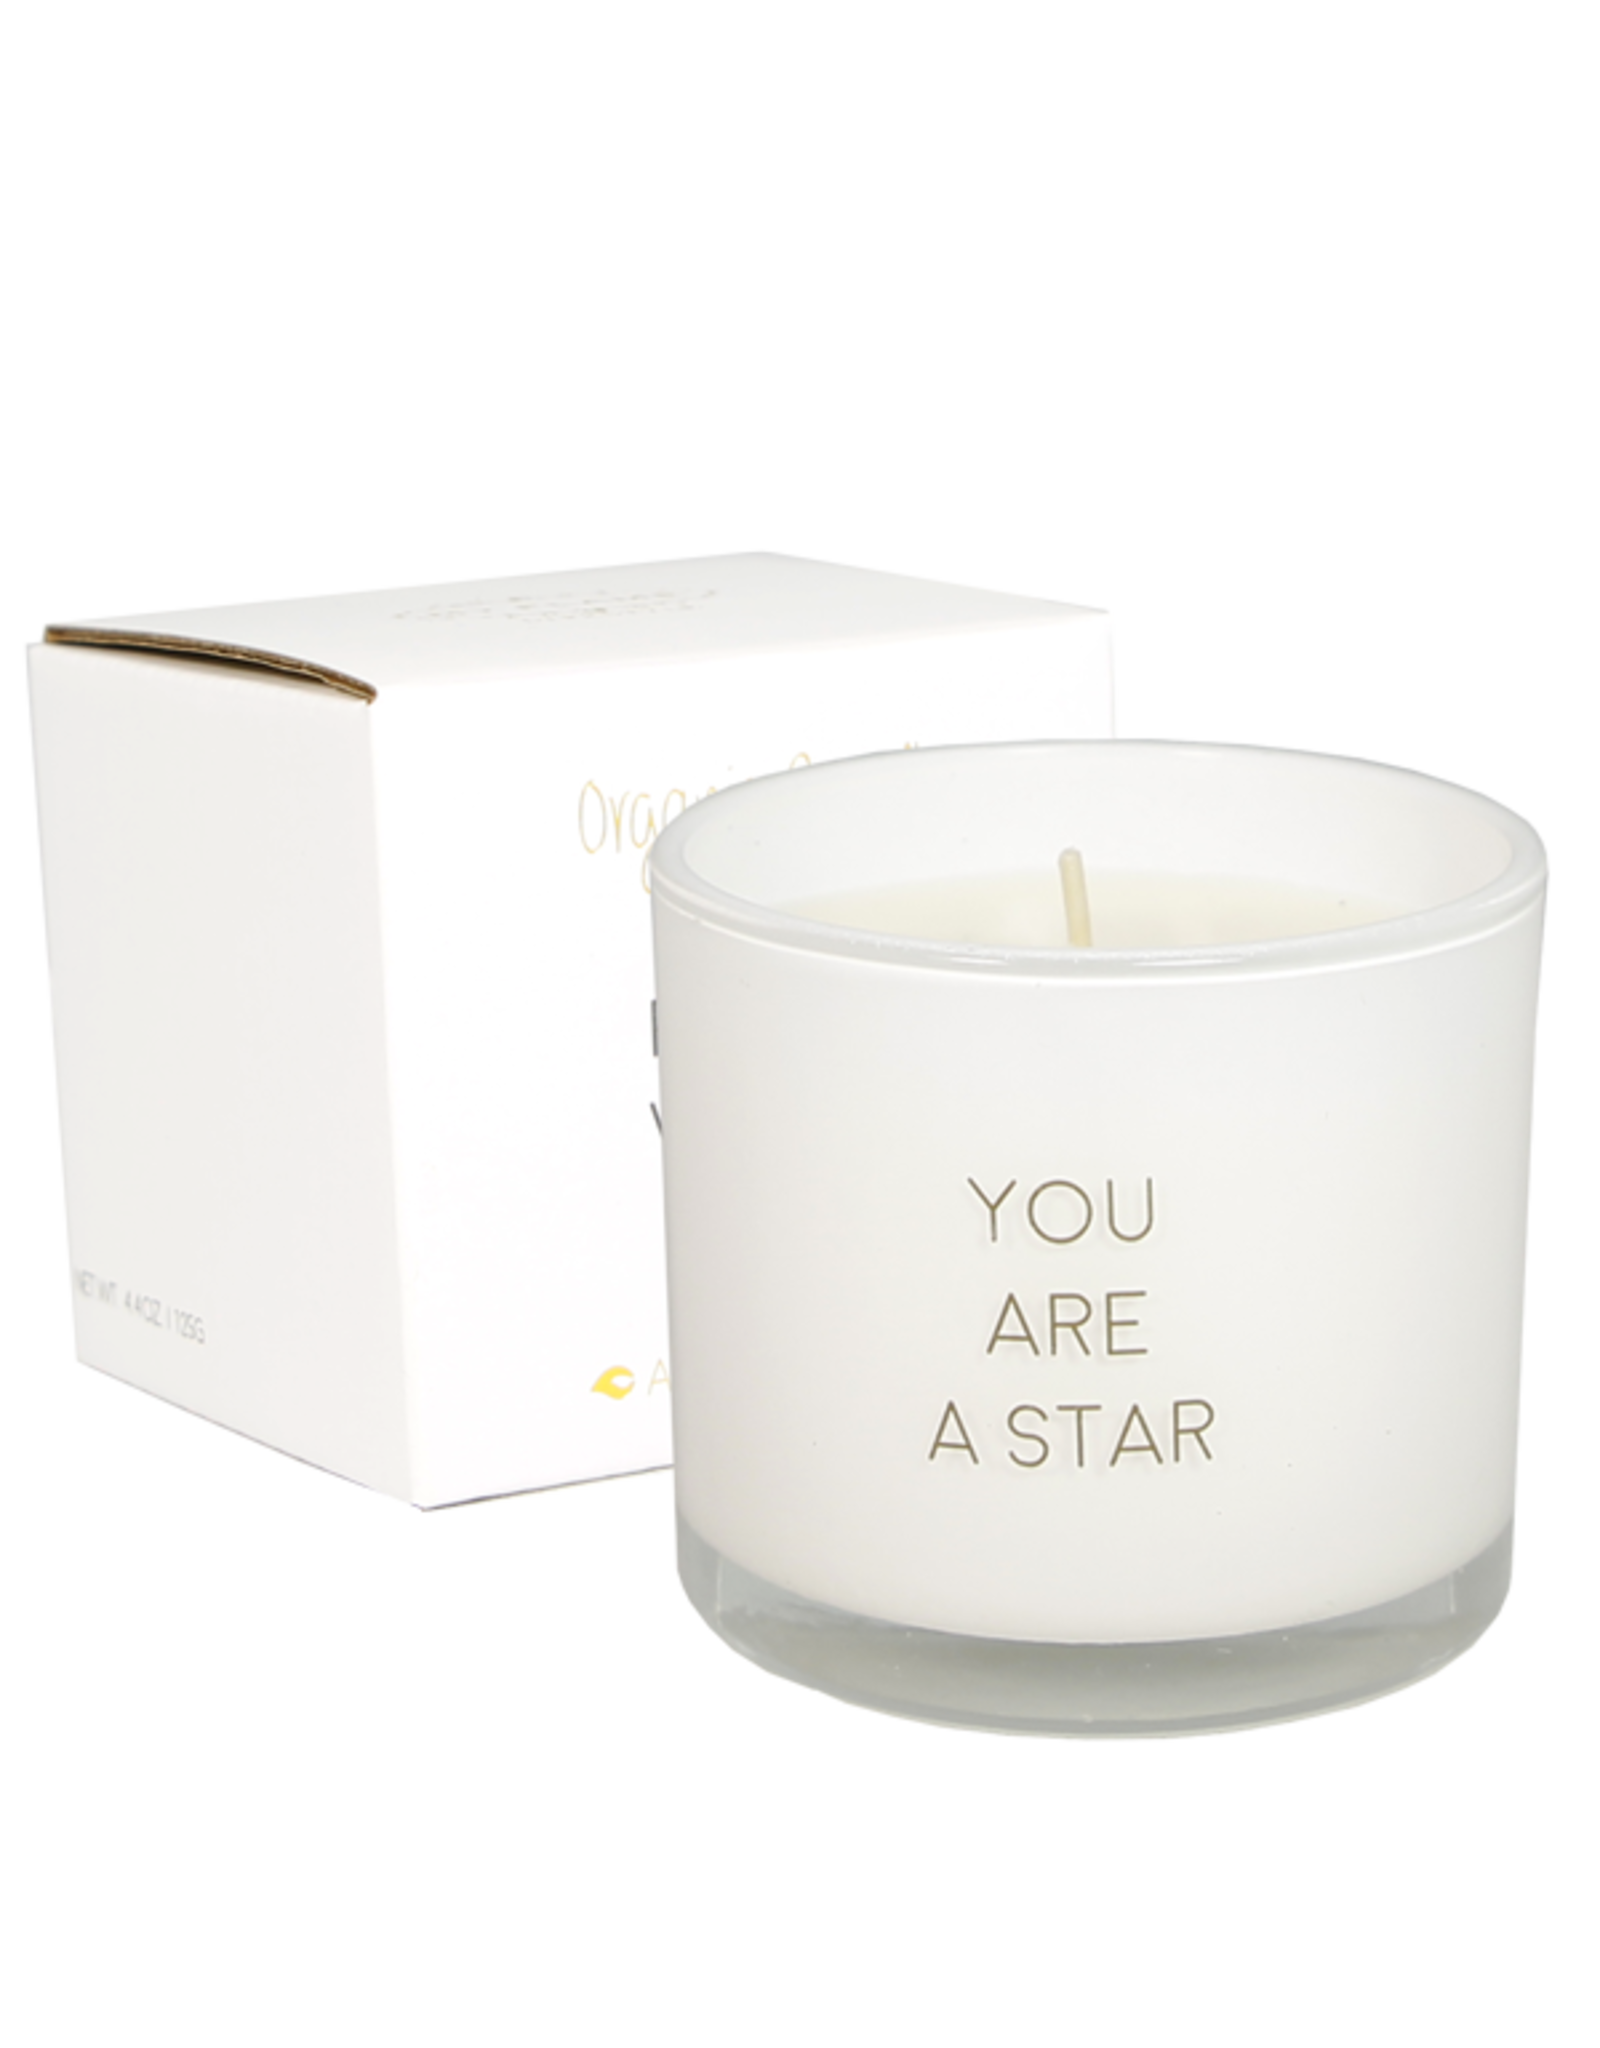 My flame Lifestyle Geurkaars met wens-armband  | You are a star